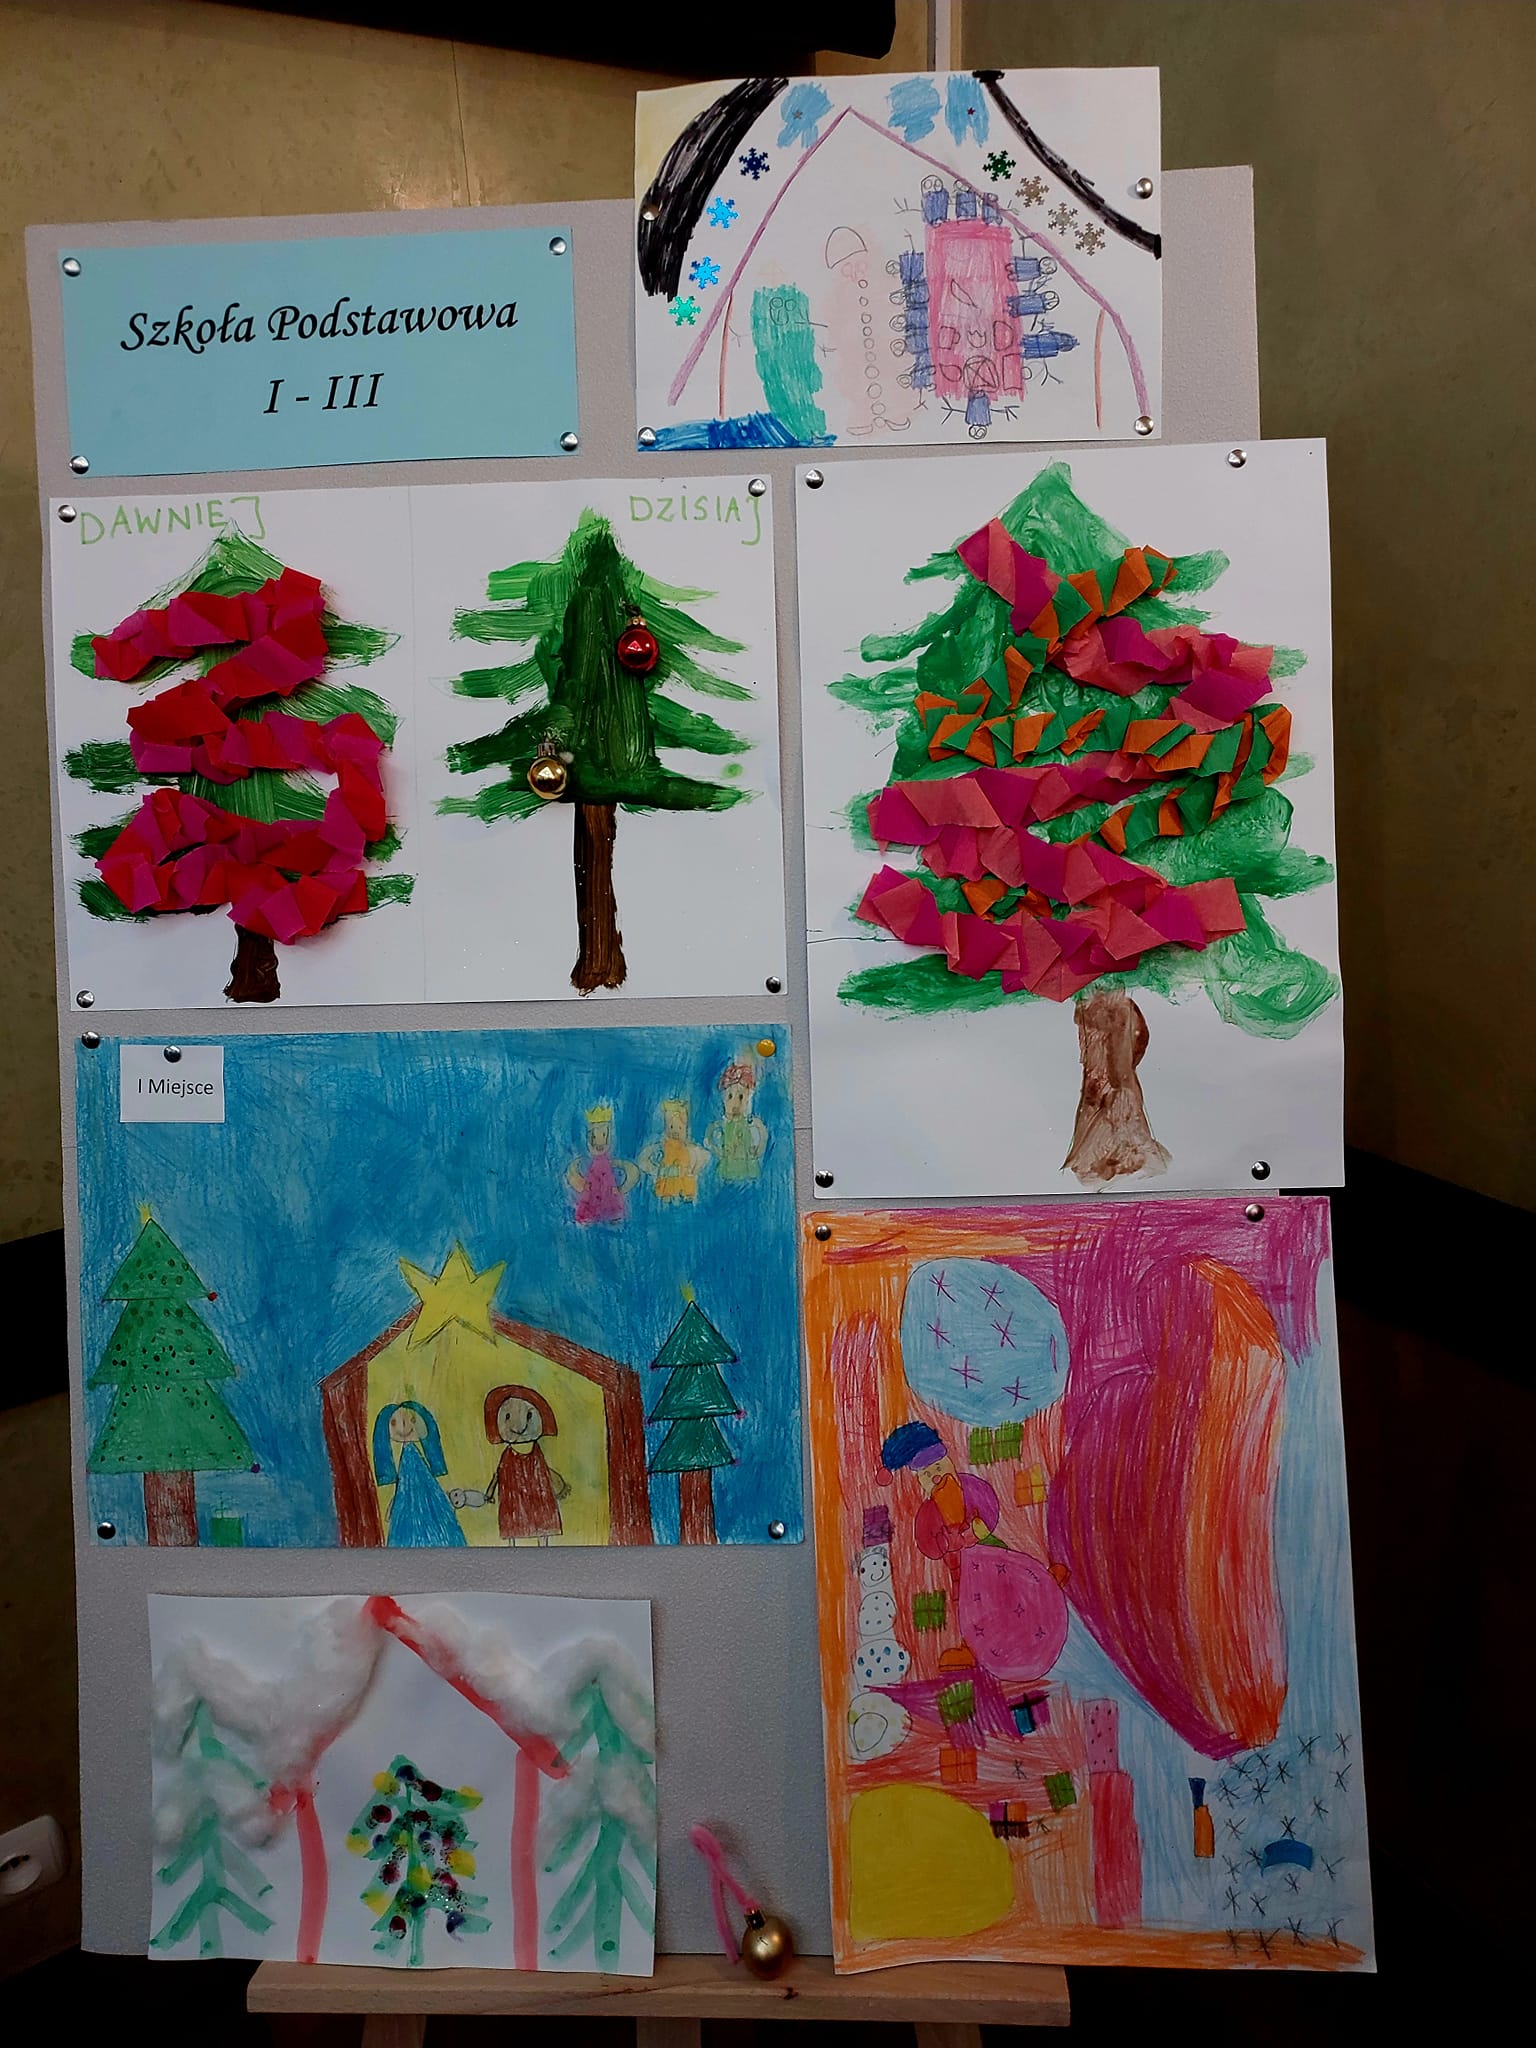   Presented on the easel works in the category of elementary school I - III, participating in the art contest 